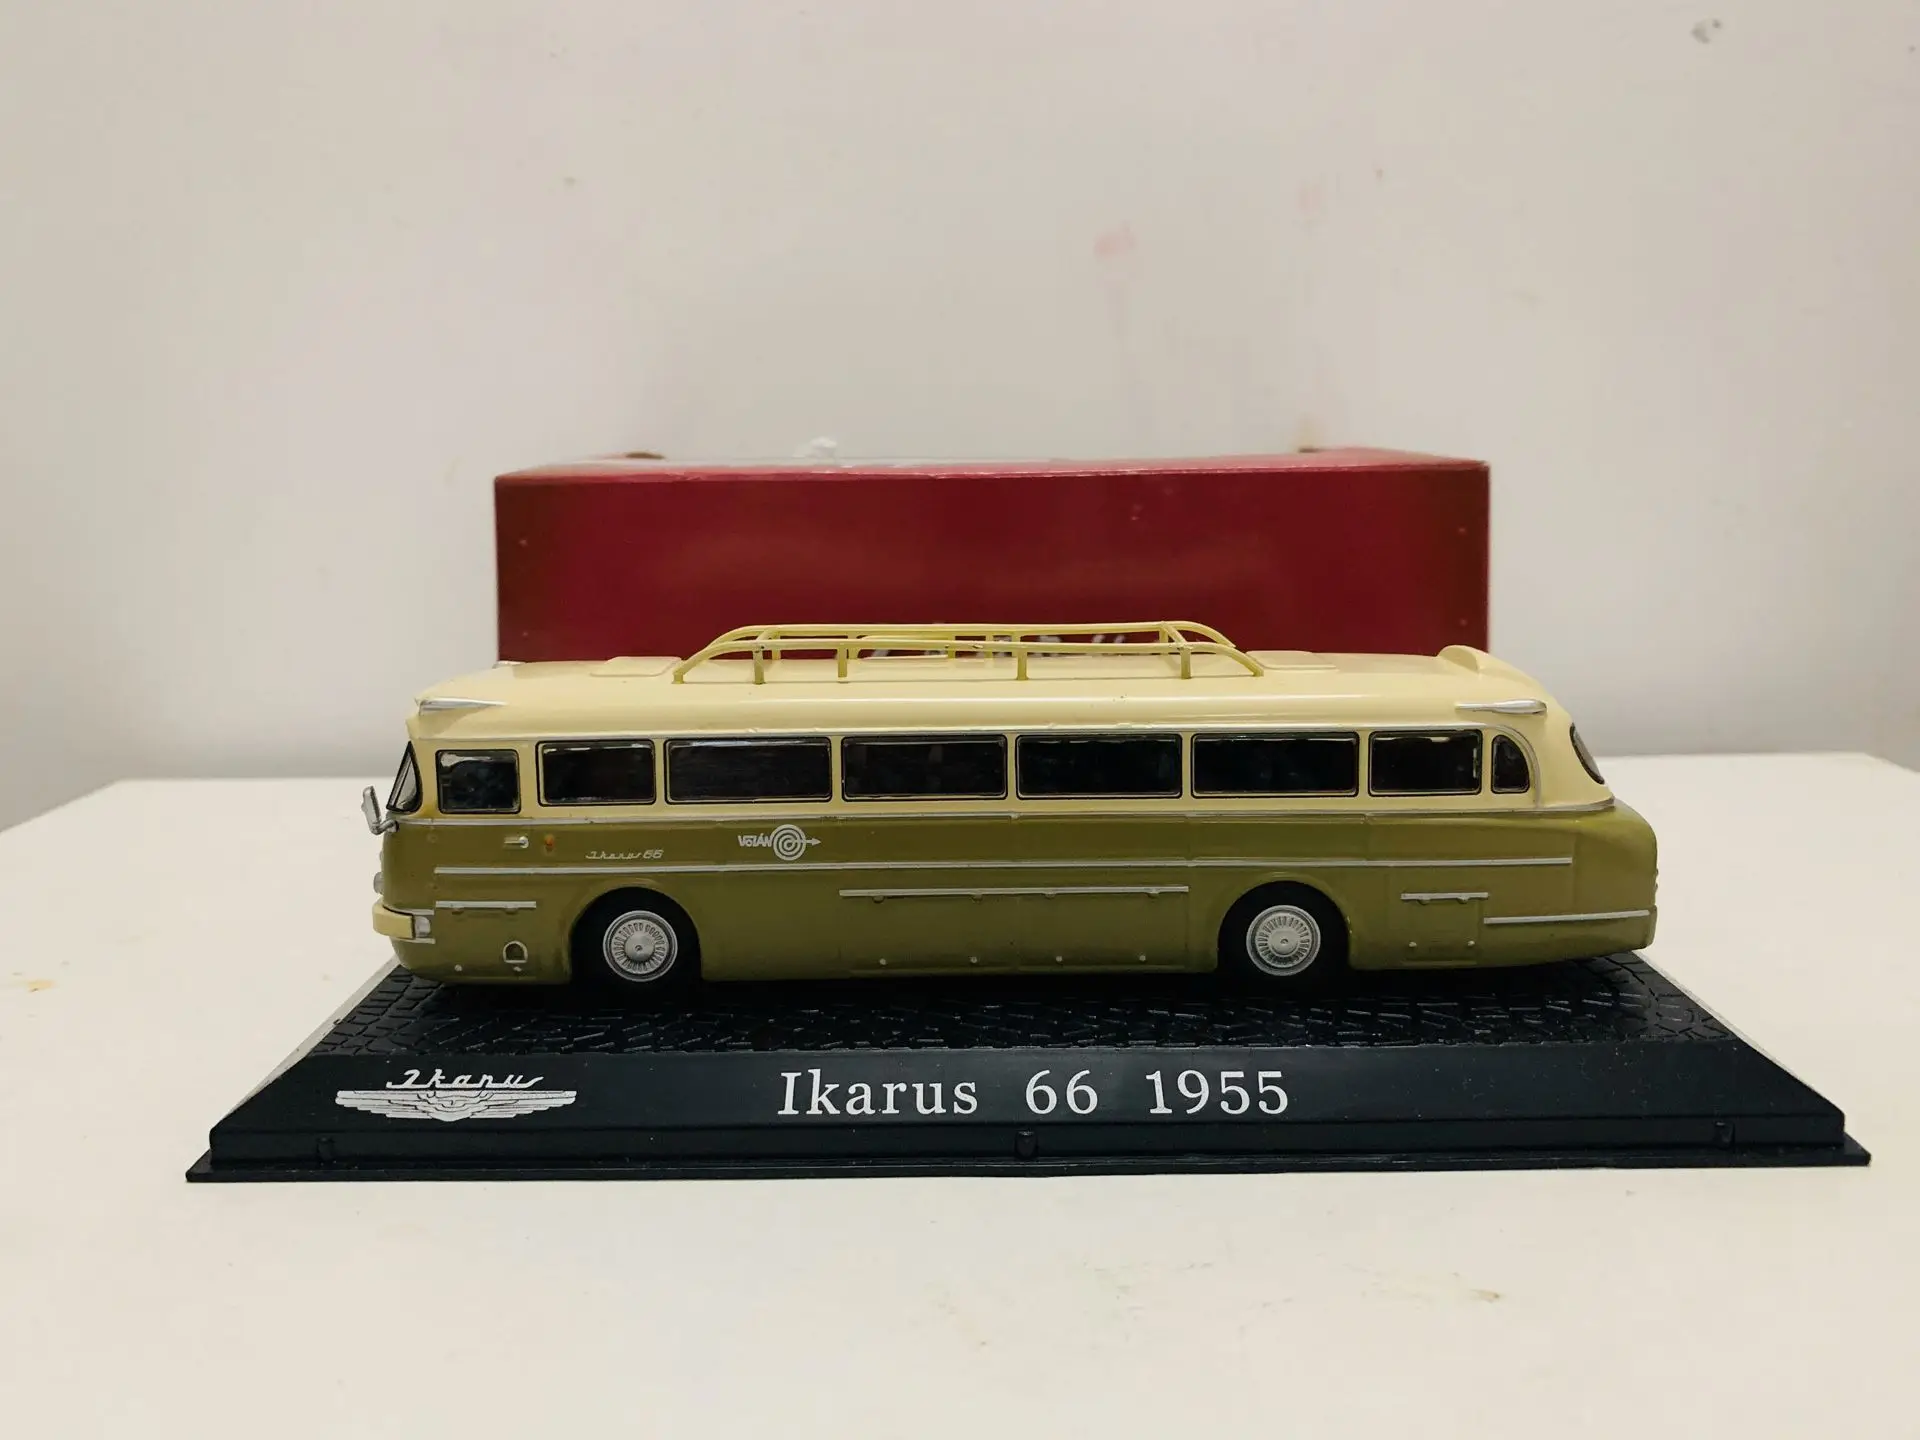 Editions Atlas Collections Ikarus 66 1955 1/72 Scale Die-Cast Model Bus New in Original Box